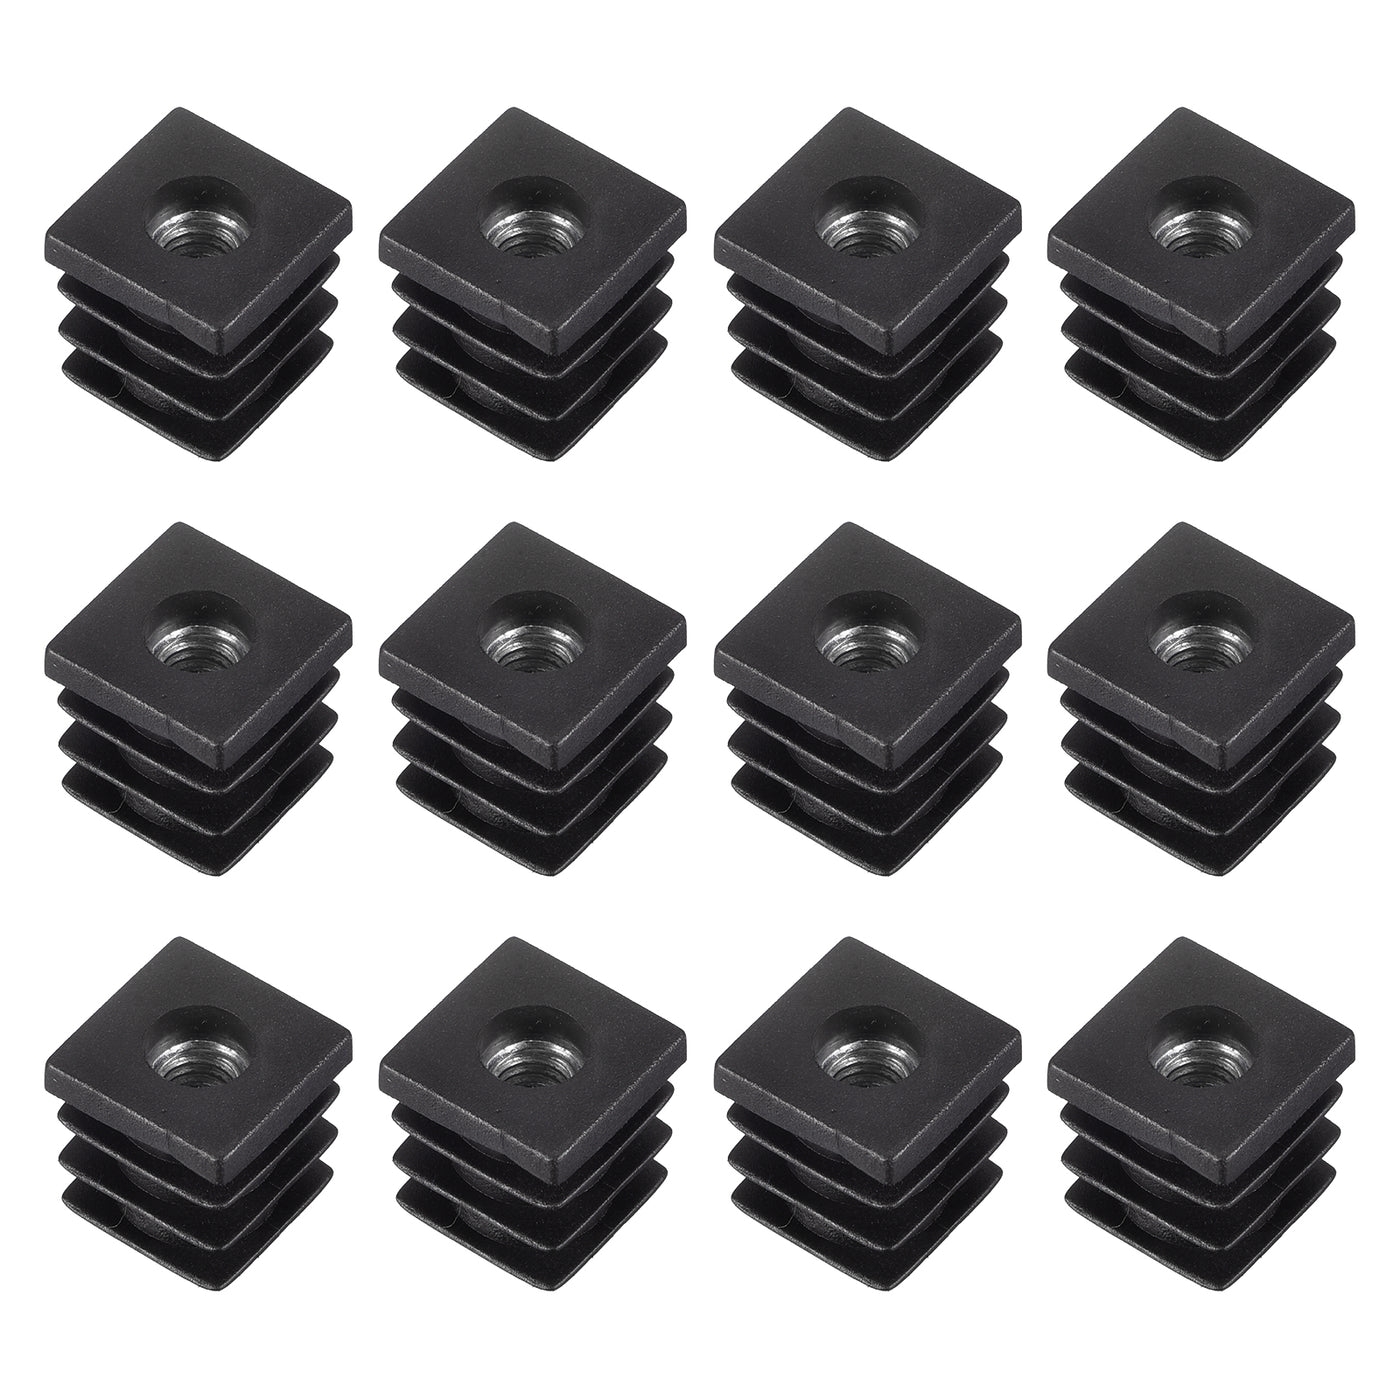 uxcell Uxcell 12Pcs 0.63"x0.63" Caster Insert with Thread, Square M6 Thread for Furniture